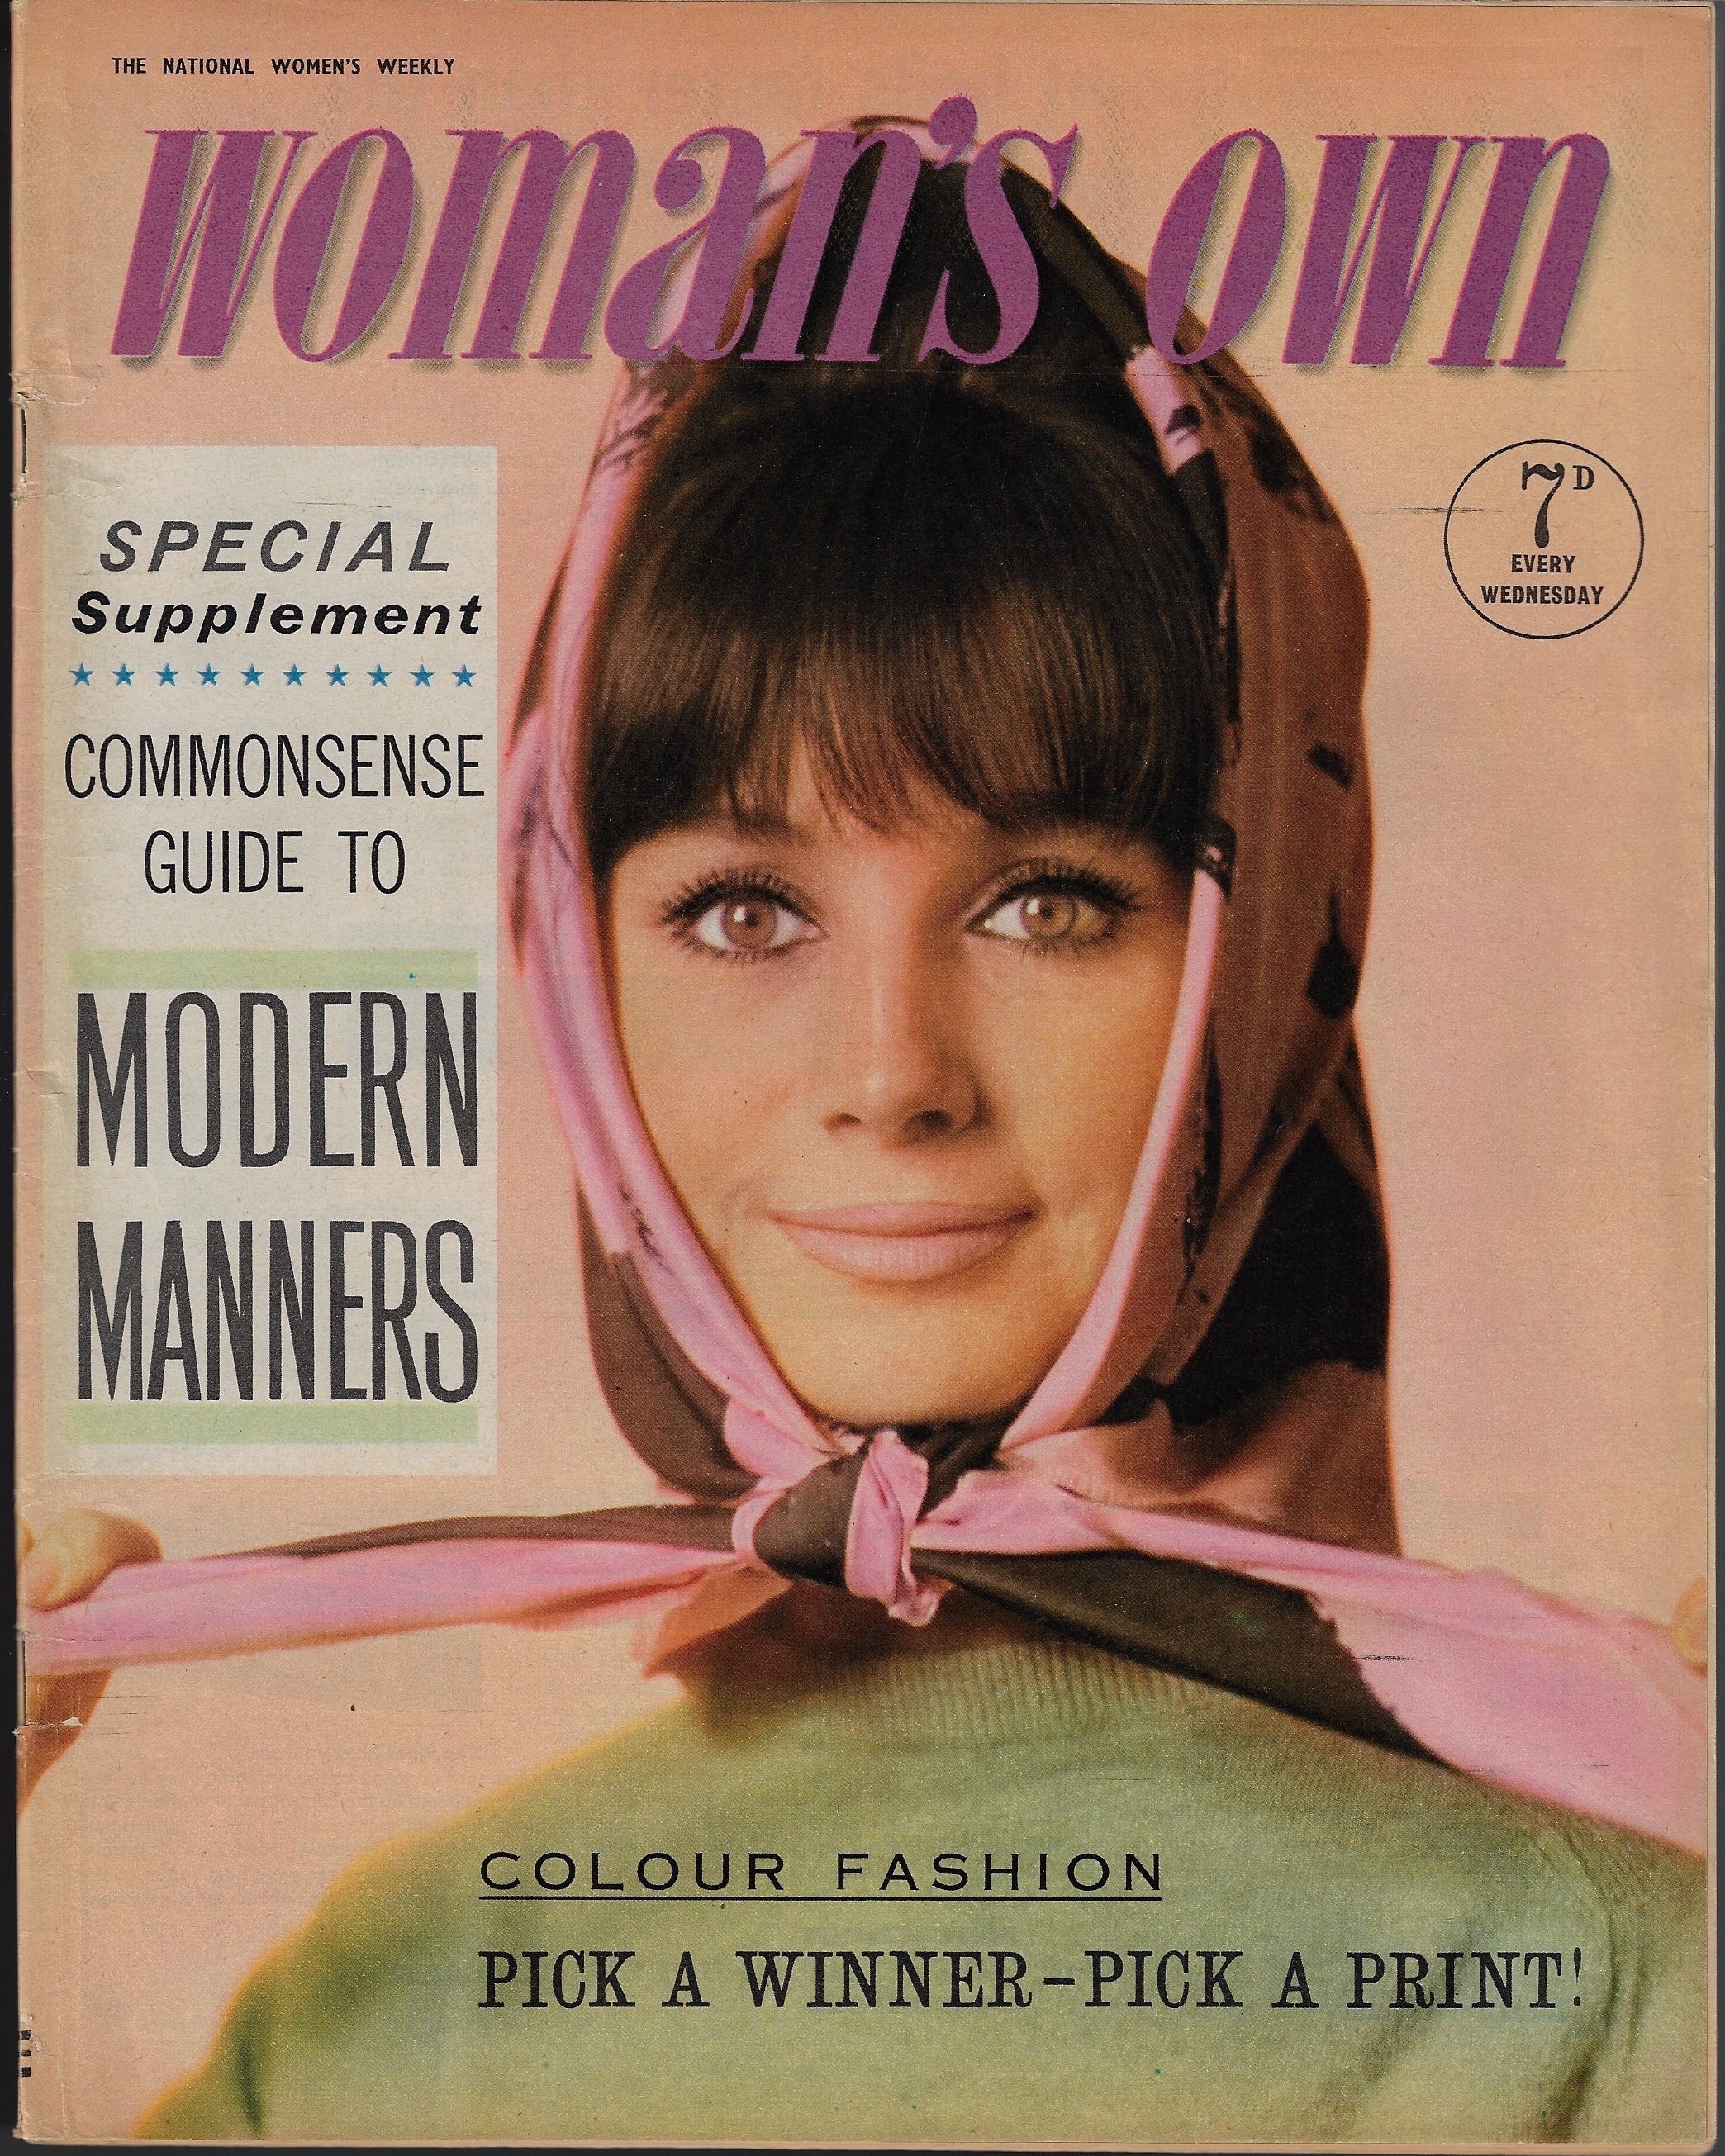 Woman's Own Magazine - The 1960s